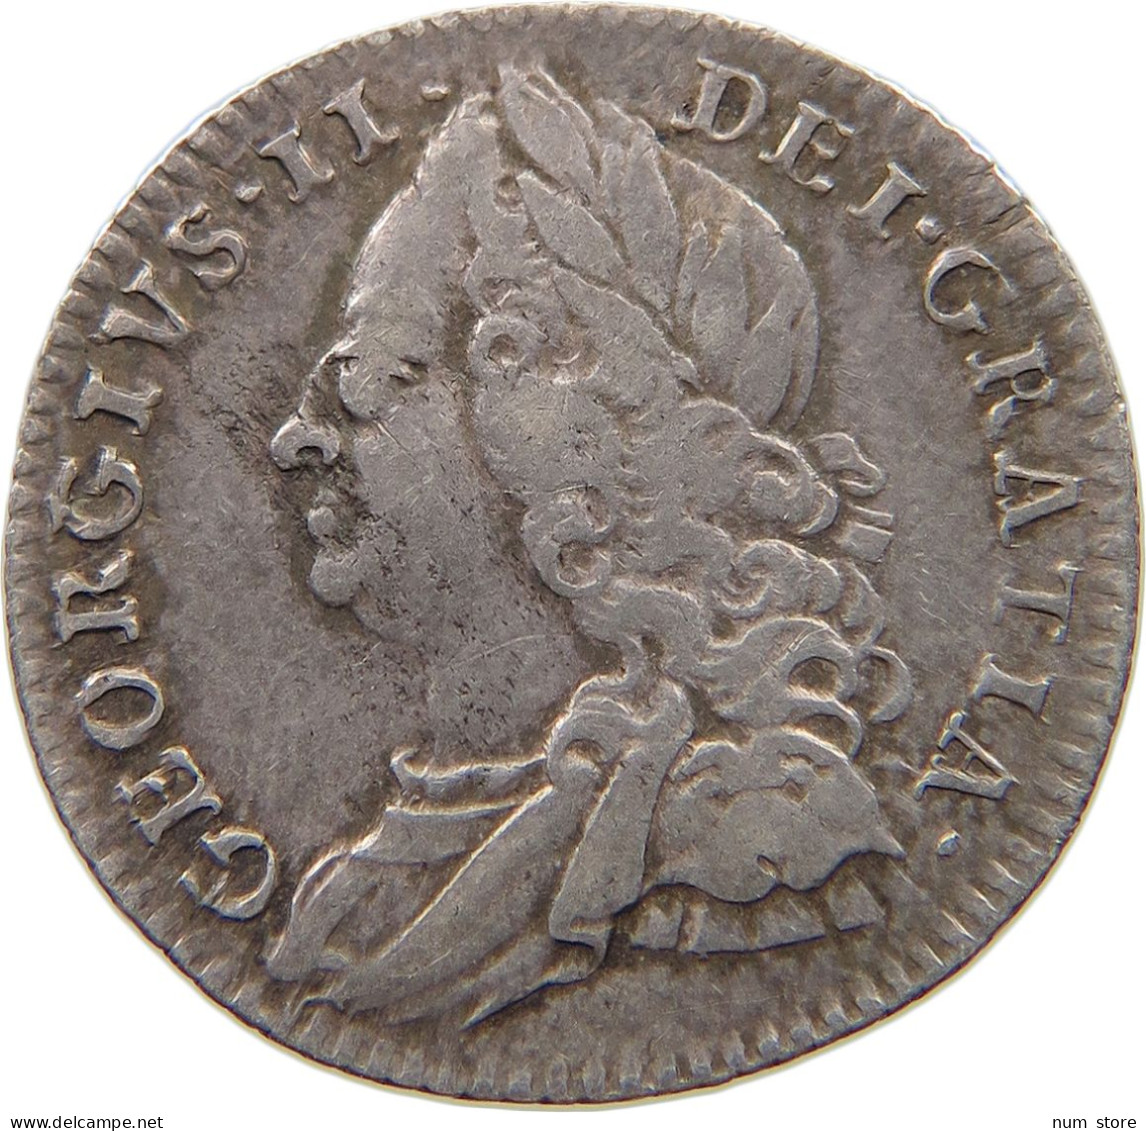 GREAT BRITAIN SIXPENCE 1758 George II. 1727-1760. #t121 0173 - G. 6 Pence